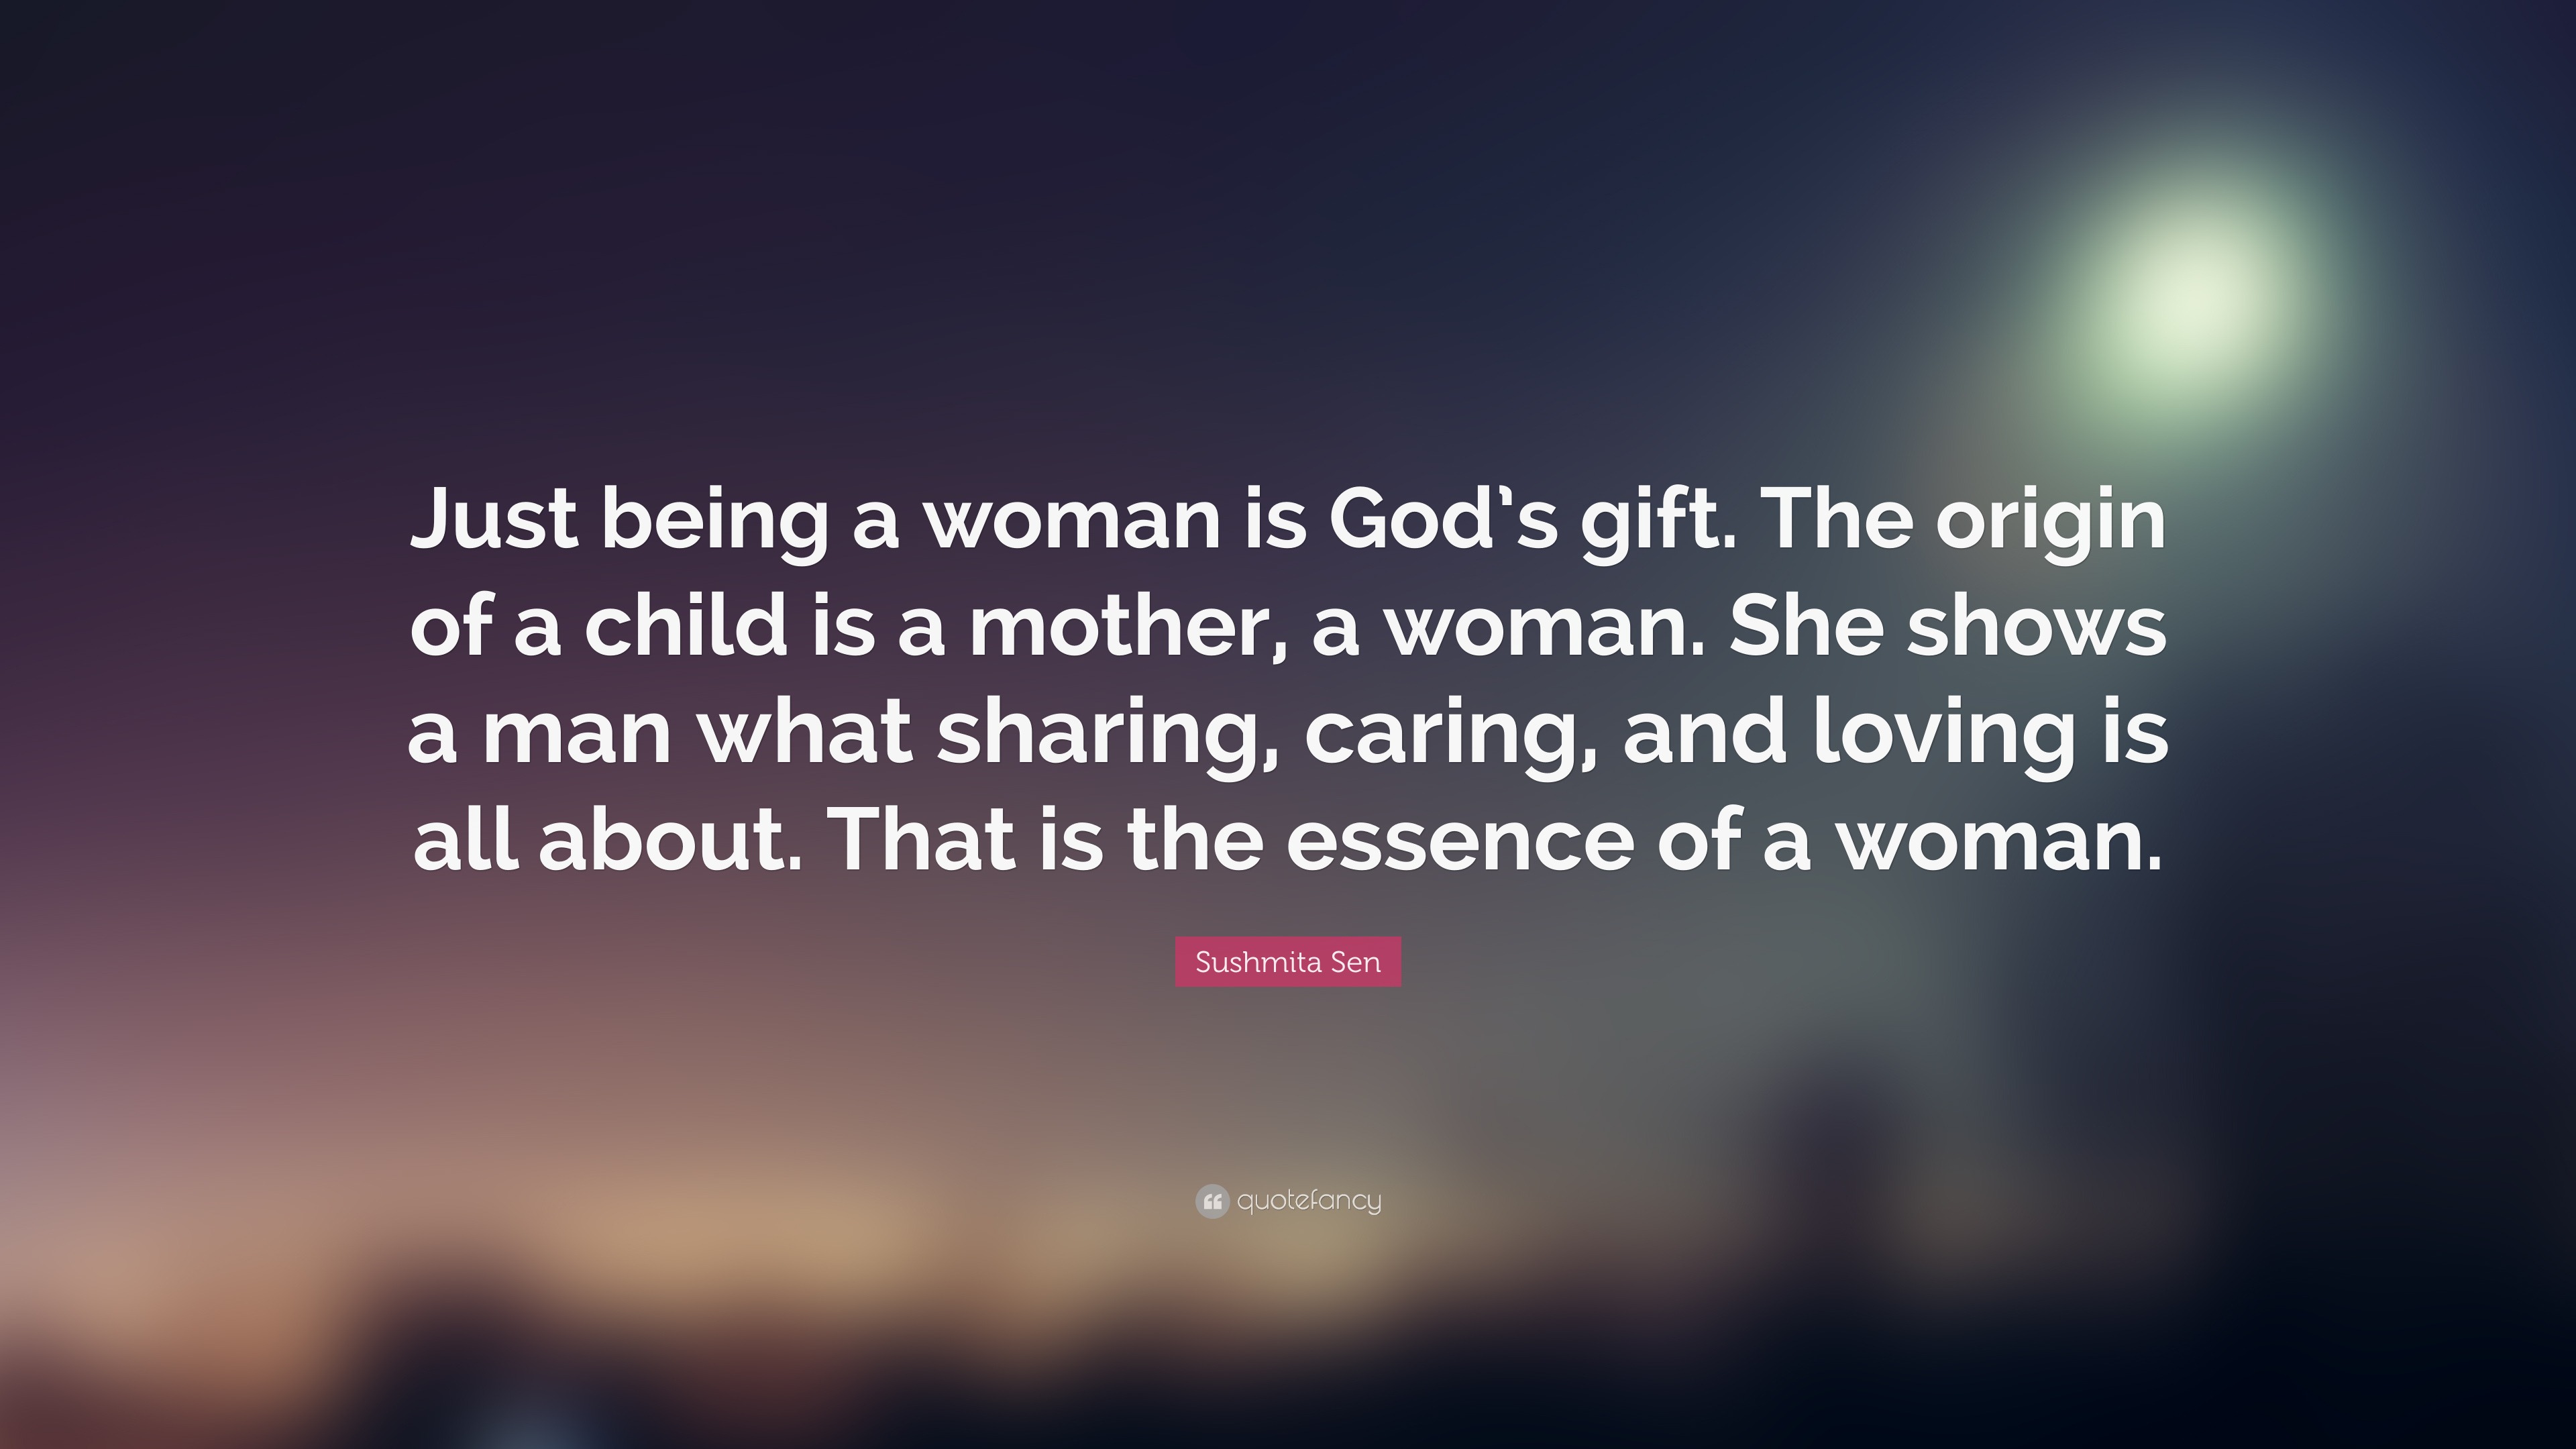 Sushmita Sen Quote “Just being a woman is God s t The origin of